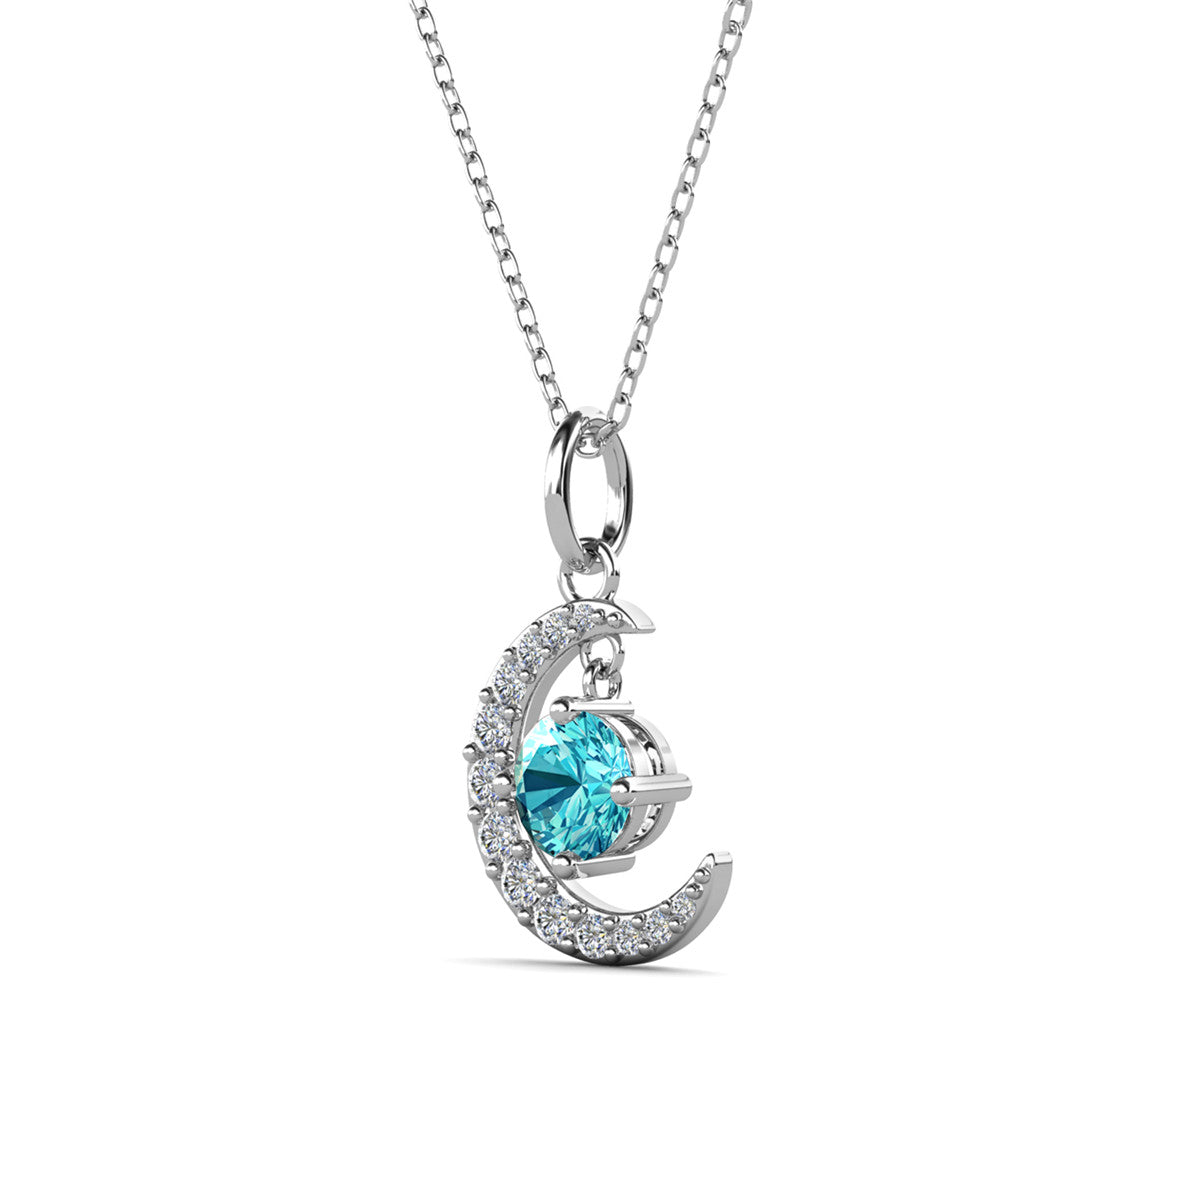 Luna Birthstone Necklace 18k White Gold Plated with Round Cut Crystals